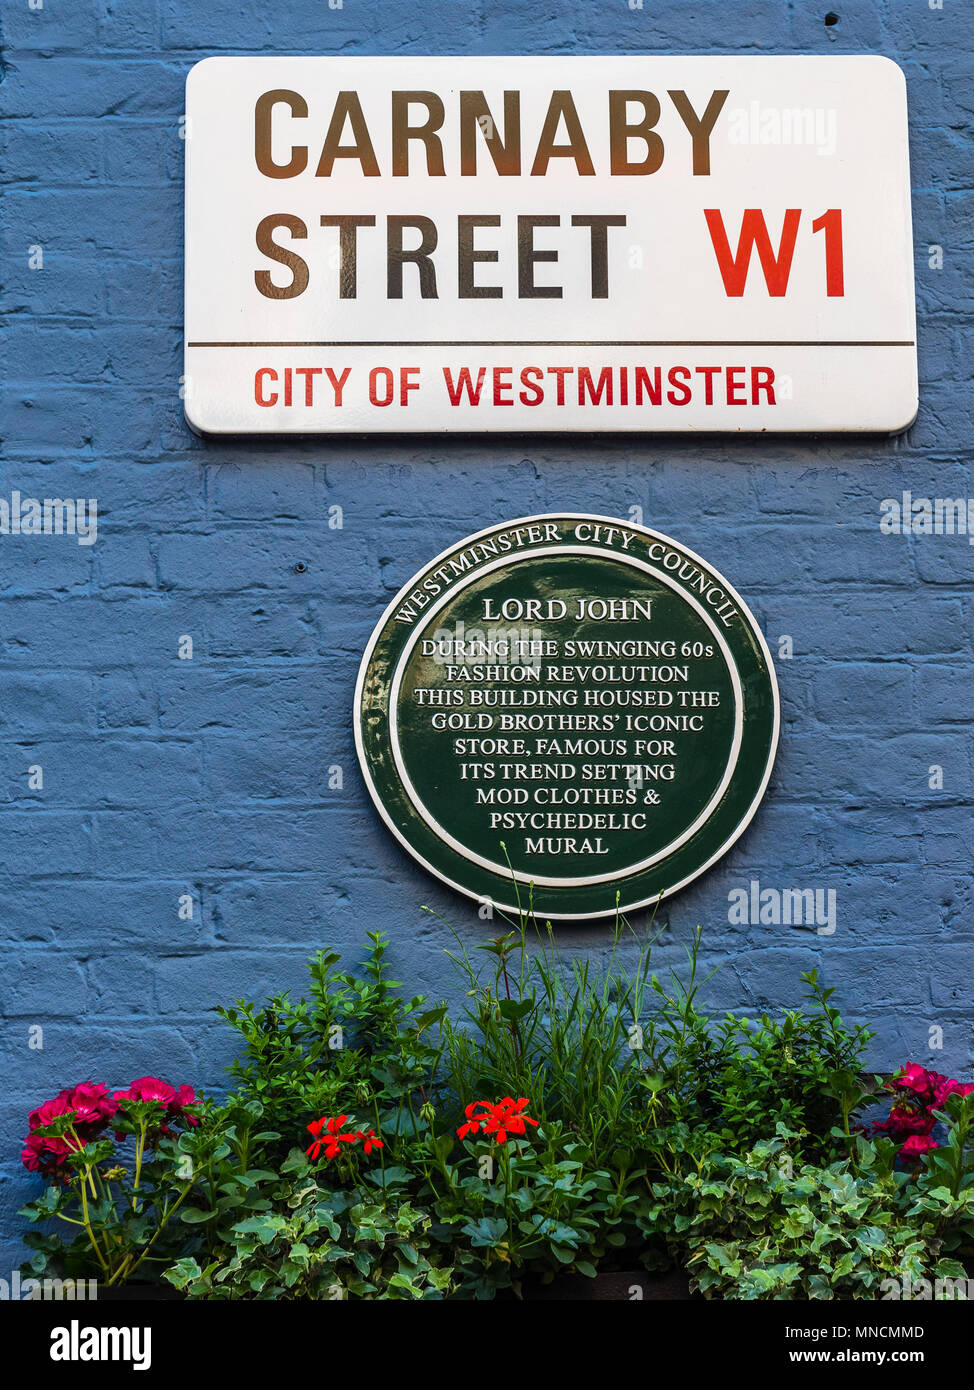 Carnaby Street Sign and London Plaque to the Lord John iconic fashion store situated there in the 1960s. Stock Photo